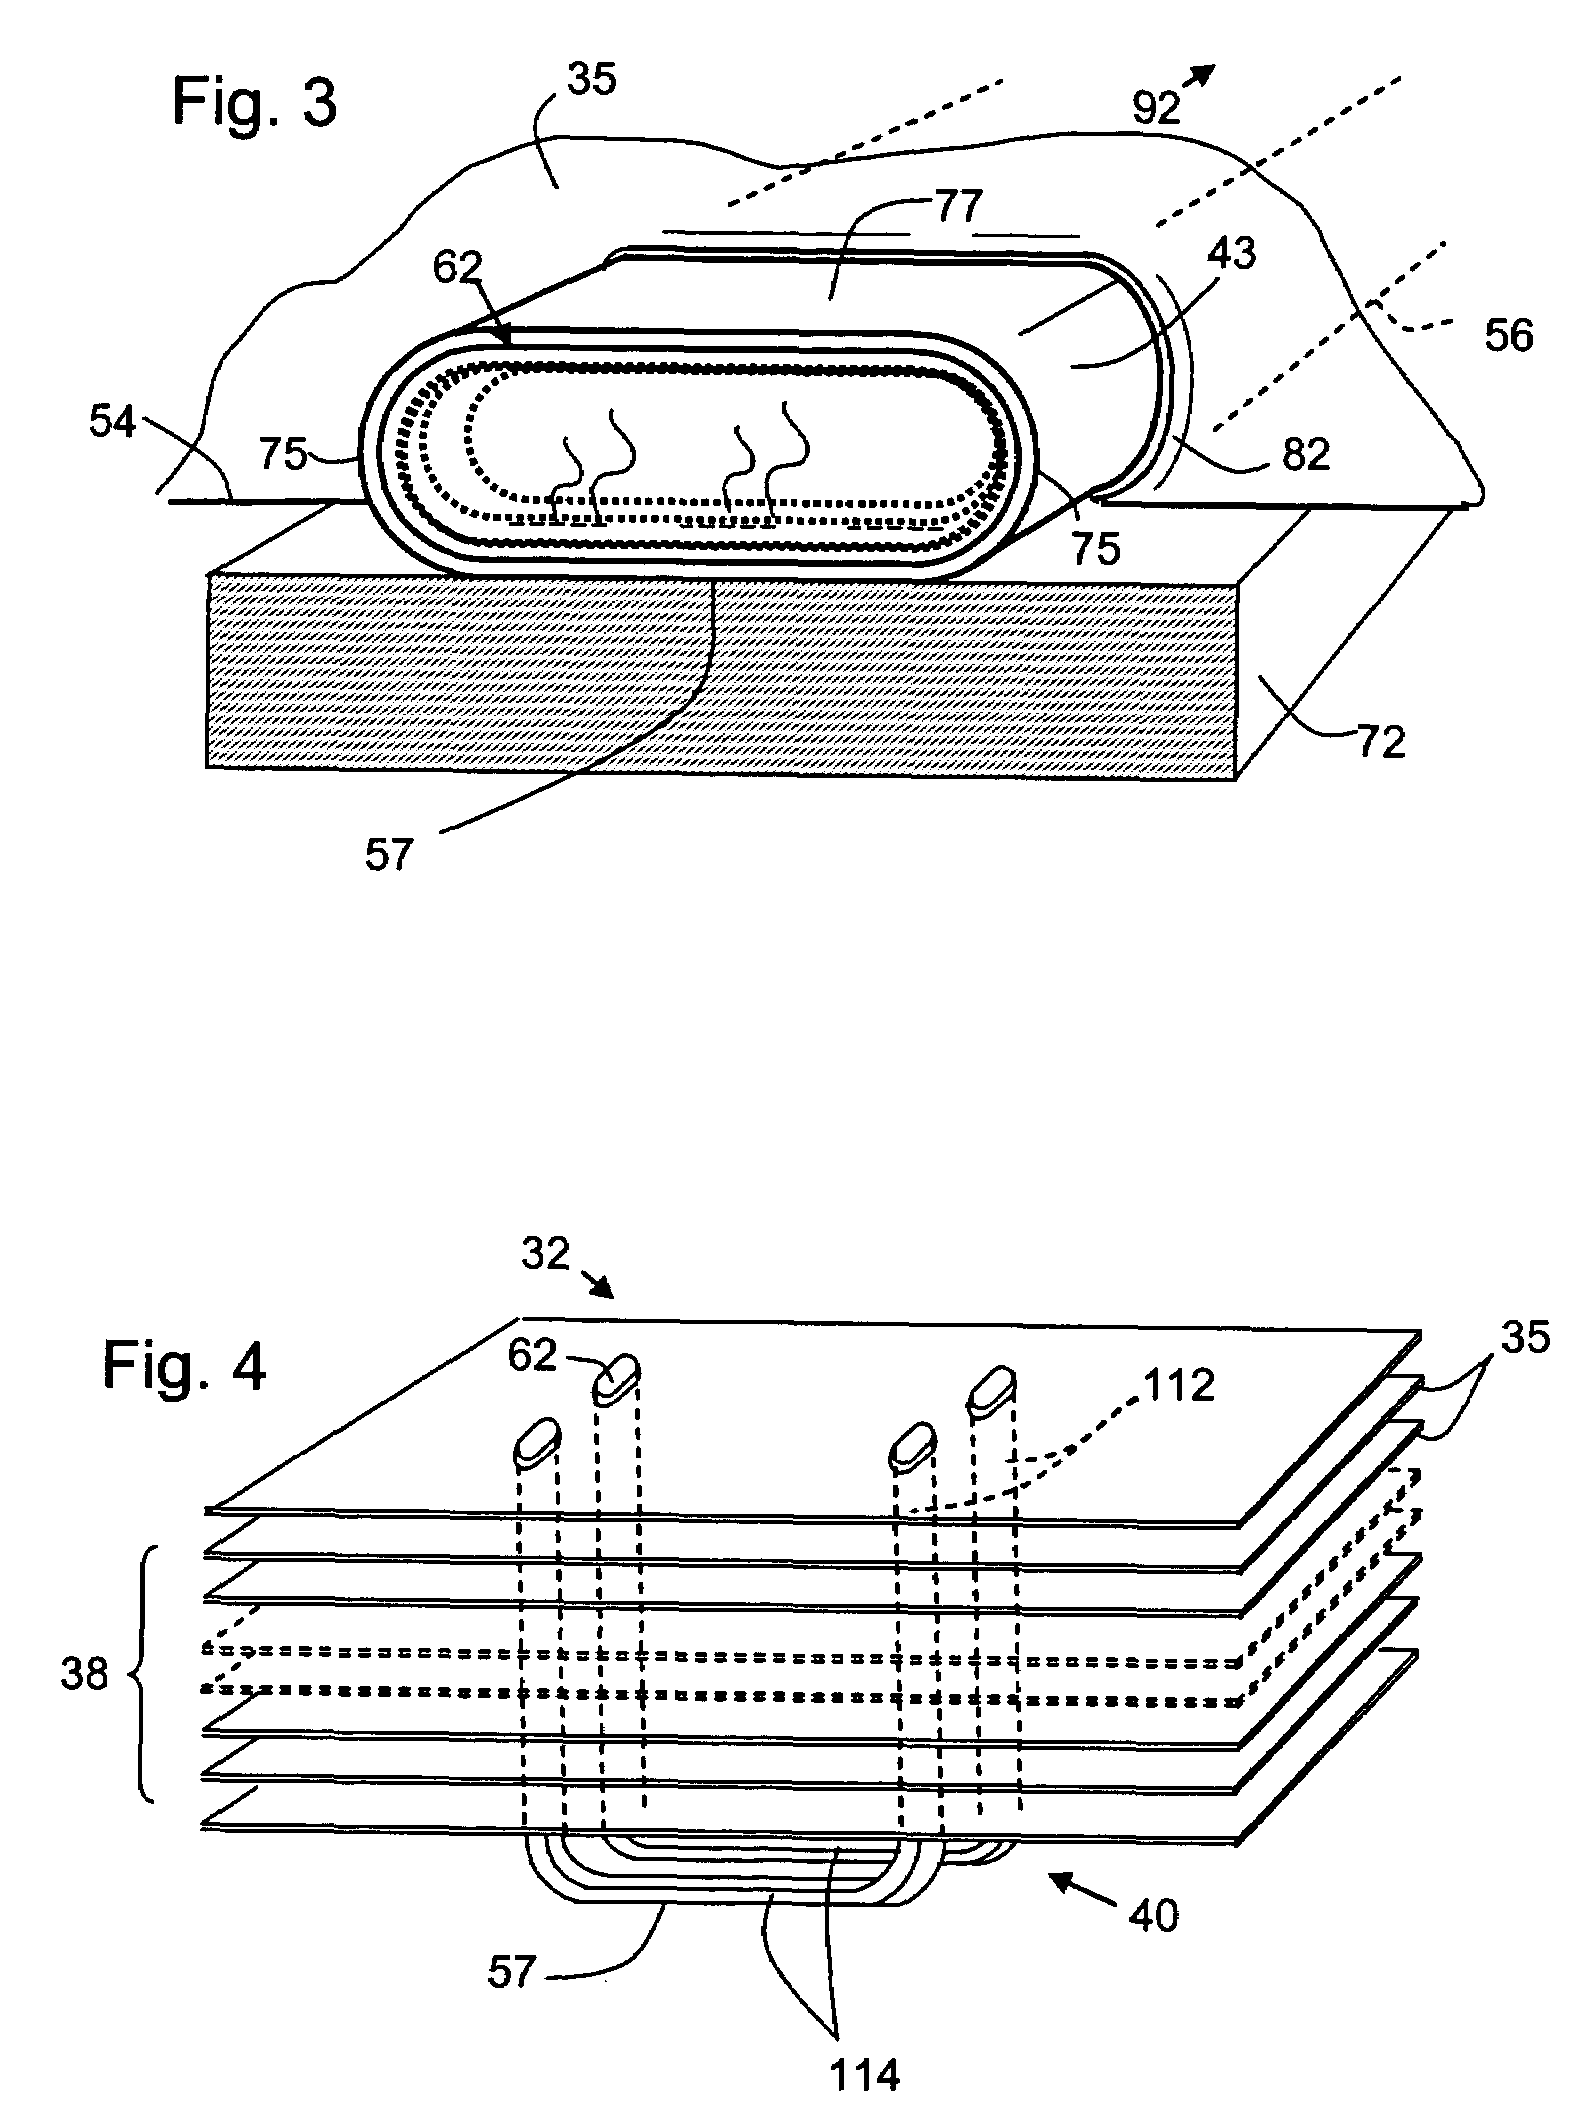 Method for forming a heat dissipation device